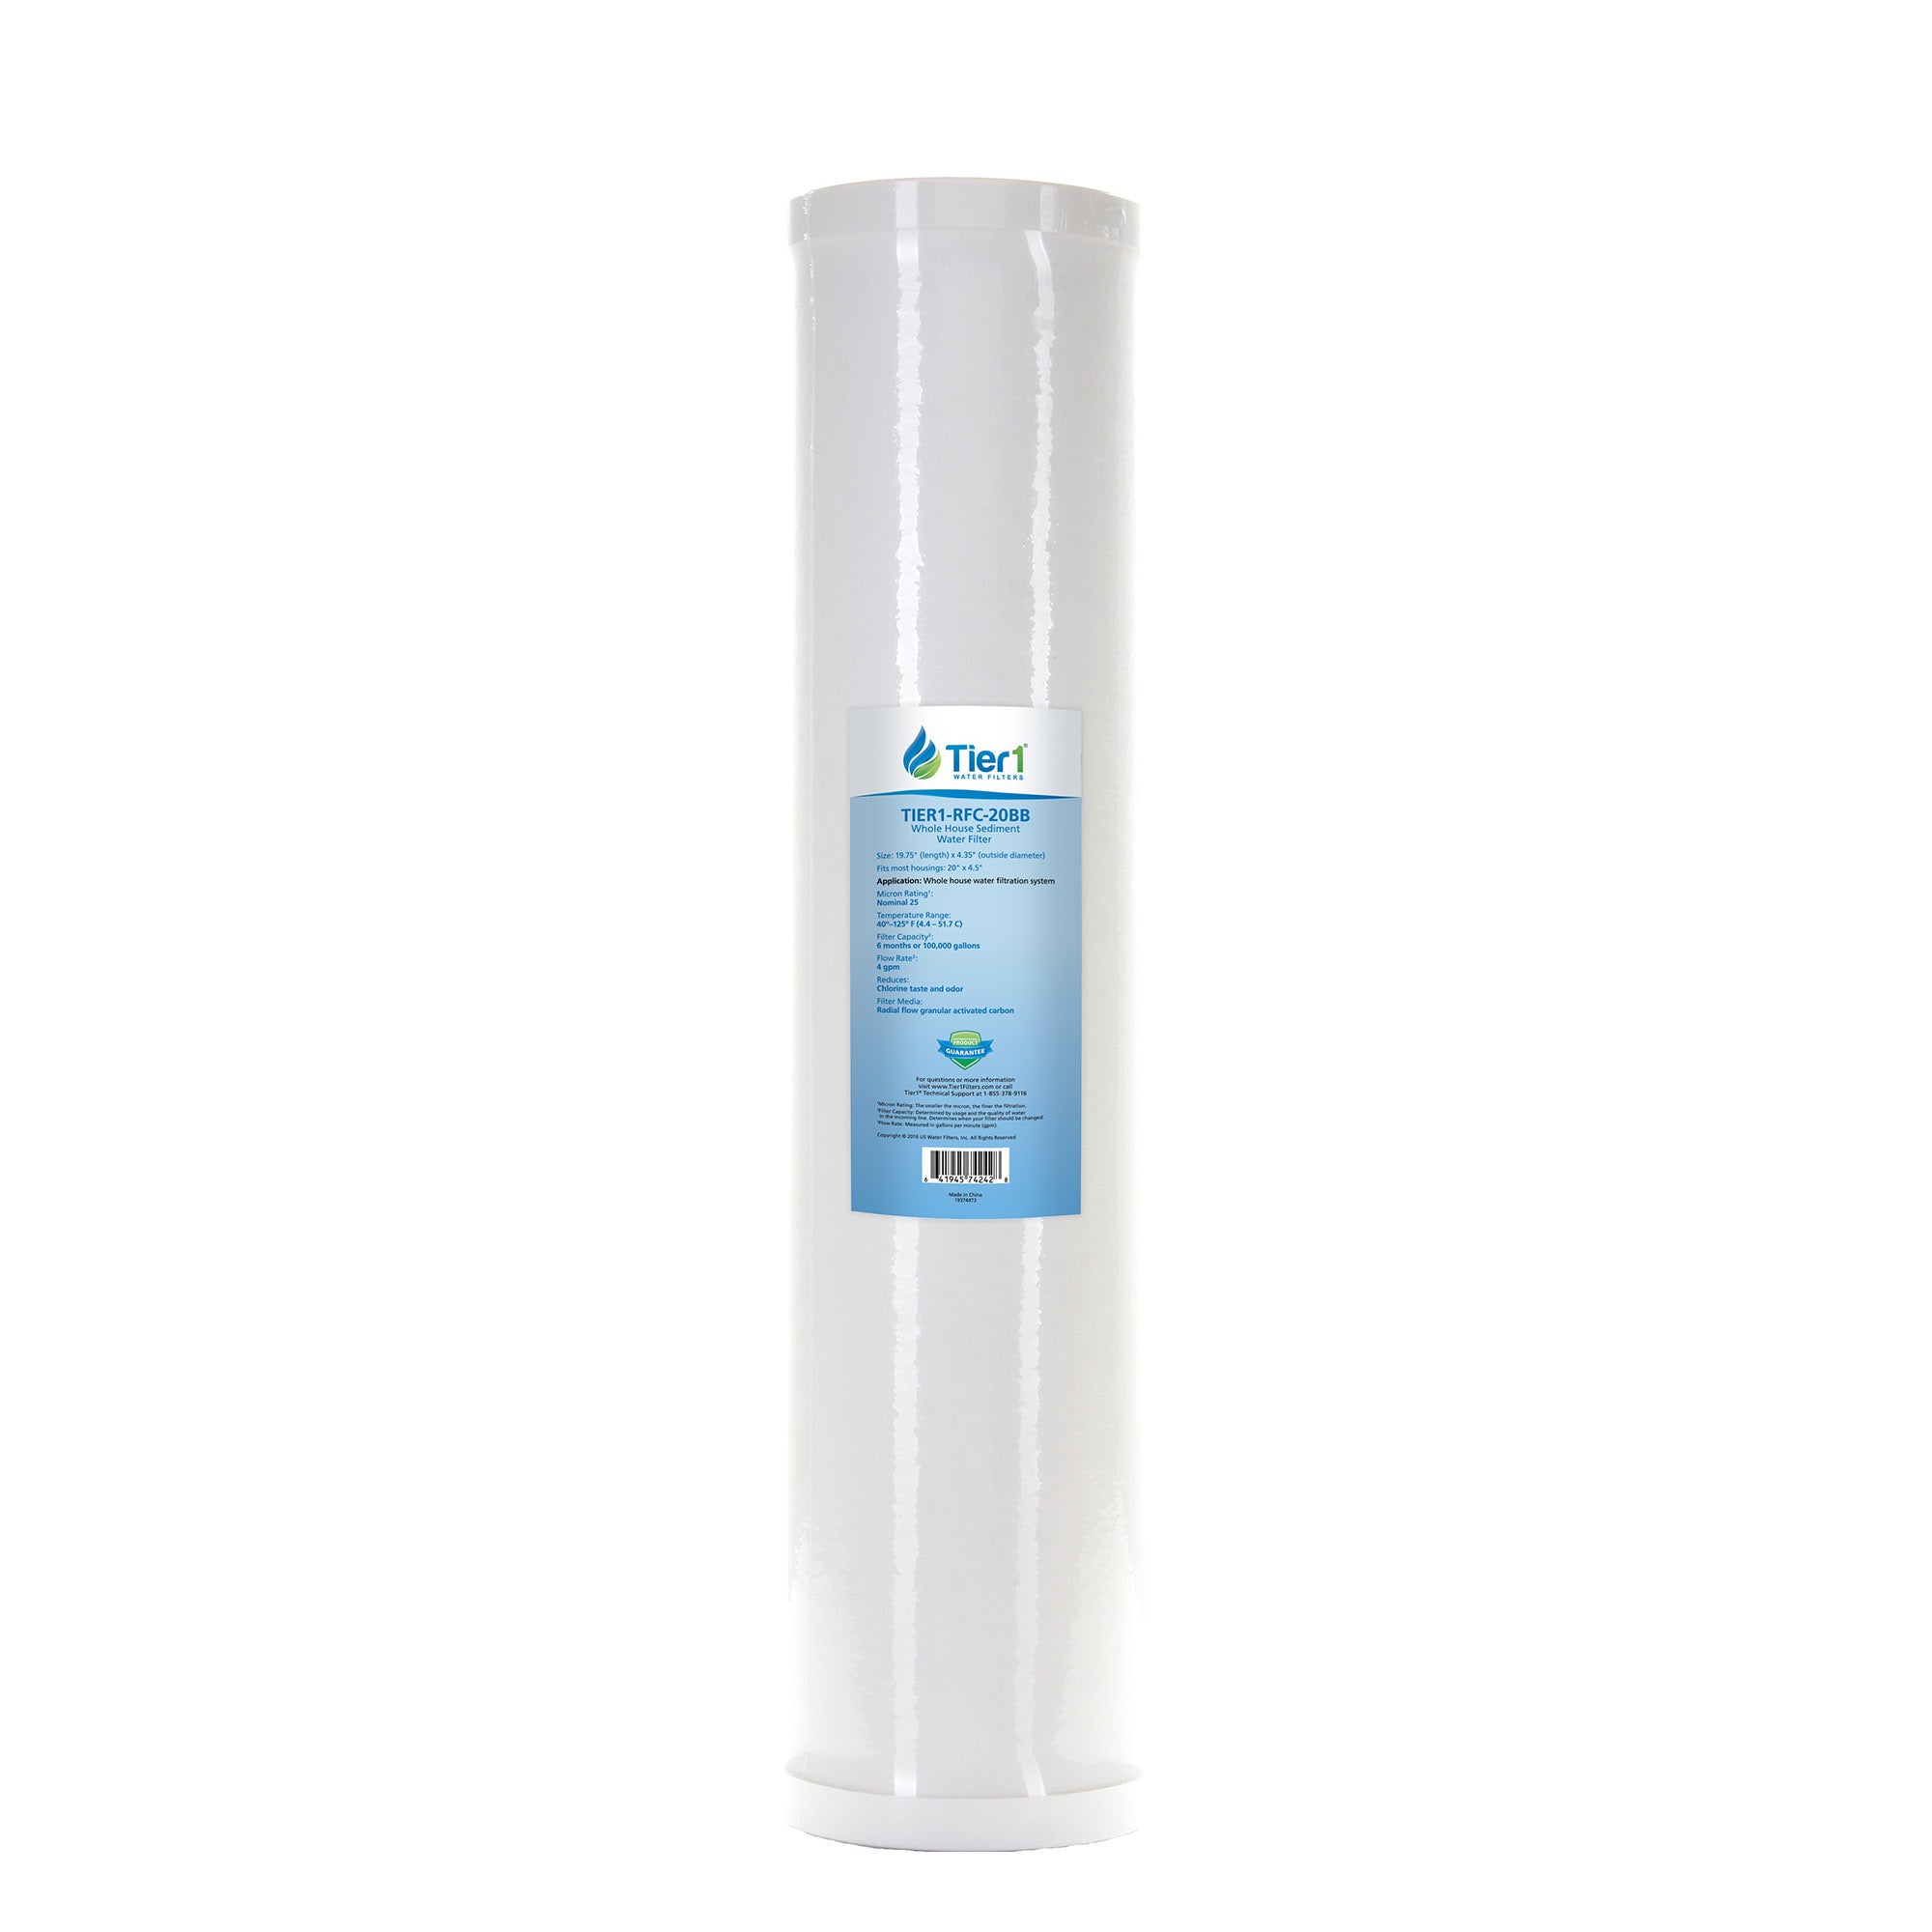 Tier1 RFC-20BB 20 X 4.5 Radial Flow Granular Activated Carbon Replacement Filter (25 micron)